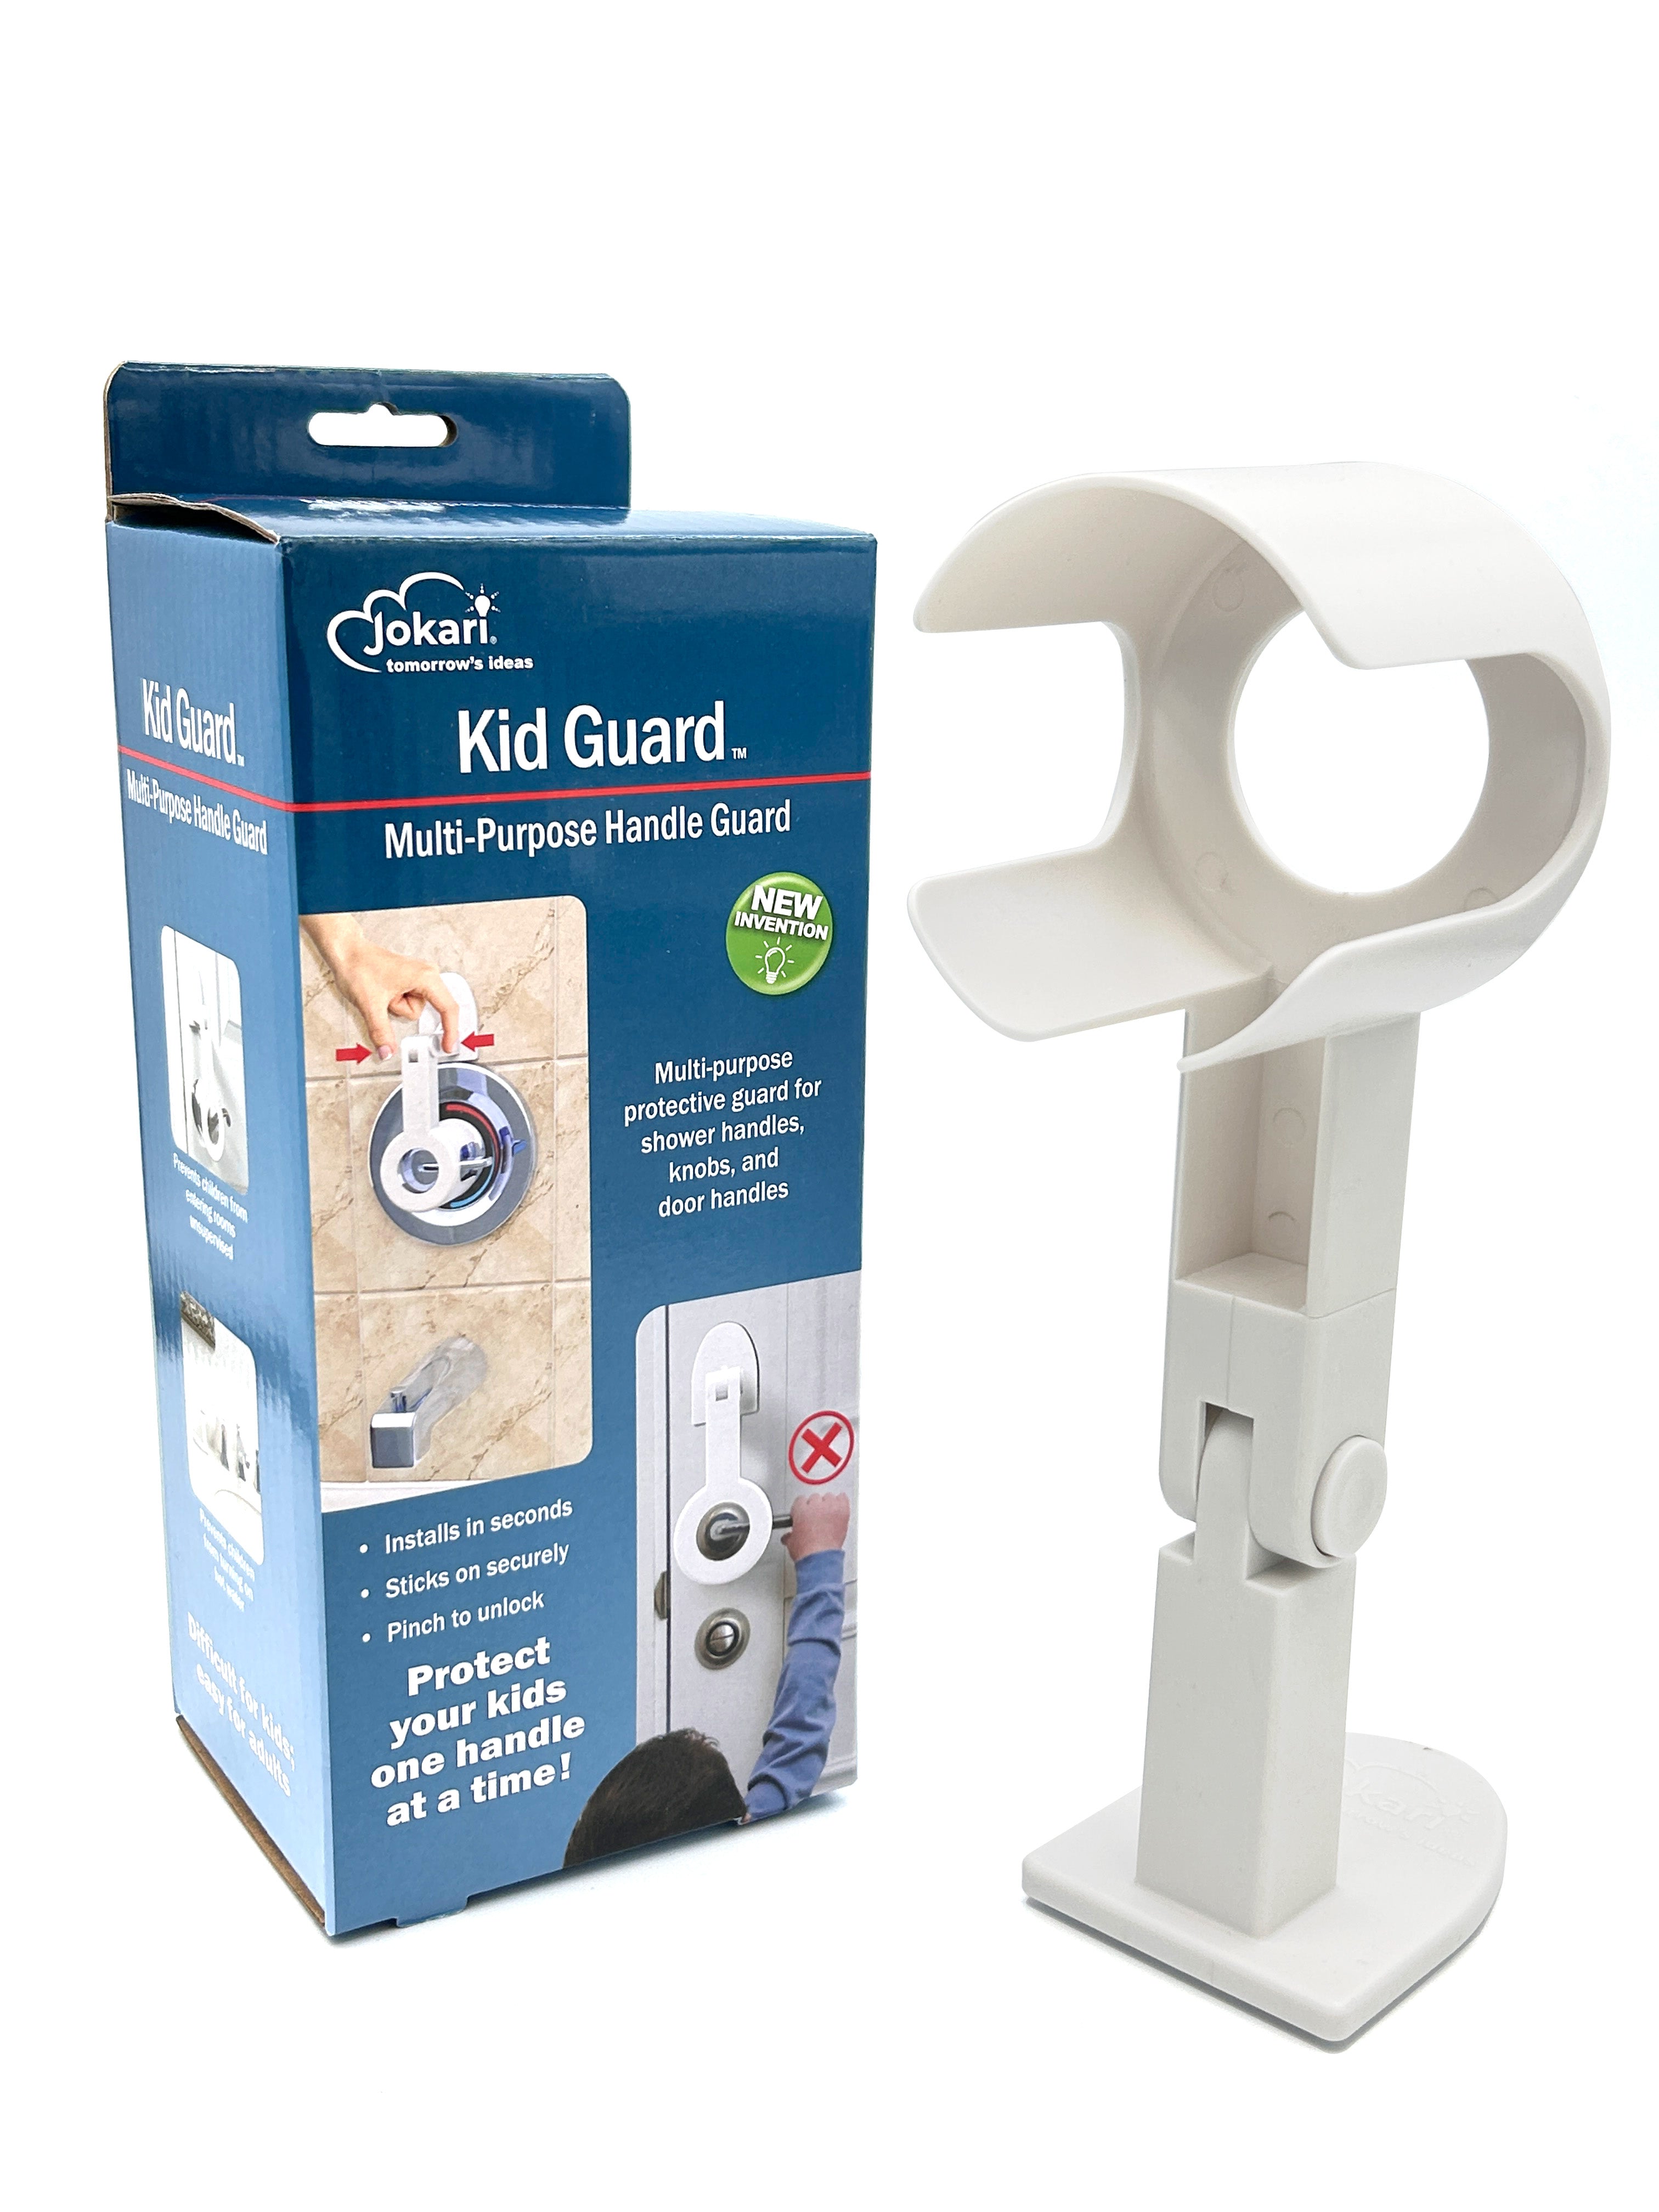 The Jokari "Kid Guard" next to its packaging. The Kid Guard is white, with a joint that lets the arm rotate and lock over knobs and handles. It's a multi-purpose handle guard/lever lock.